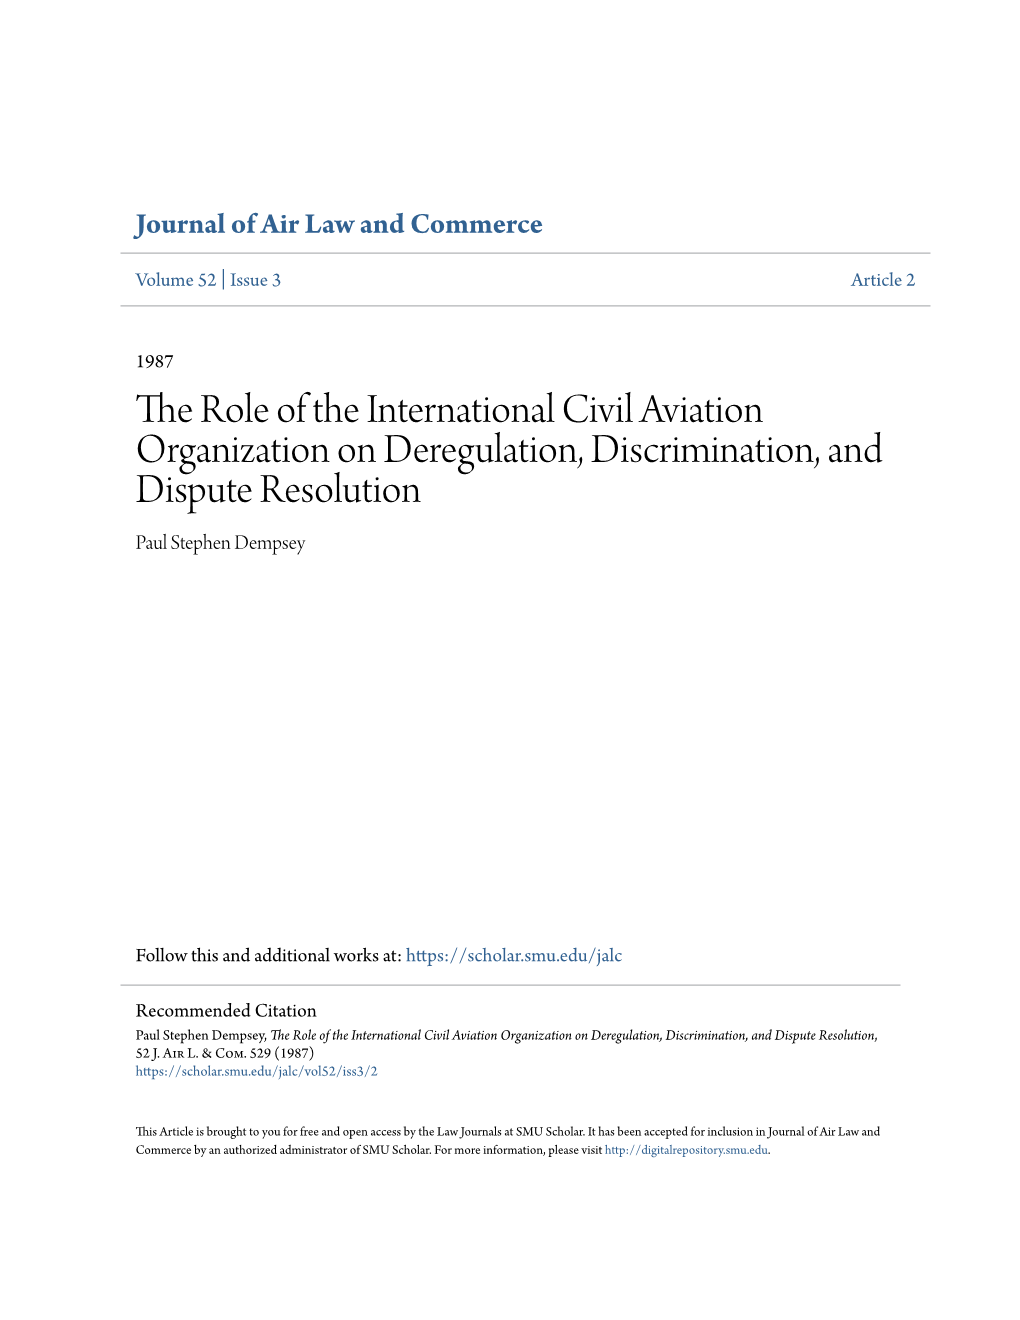 The Role of the International Civil Aviation Organization on Deregulation, Discrimination, and Dispute Resolution Paul Stephen Dempsey